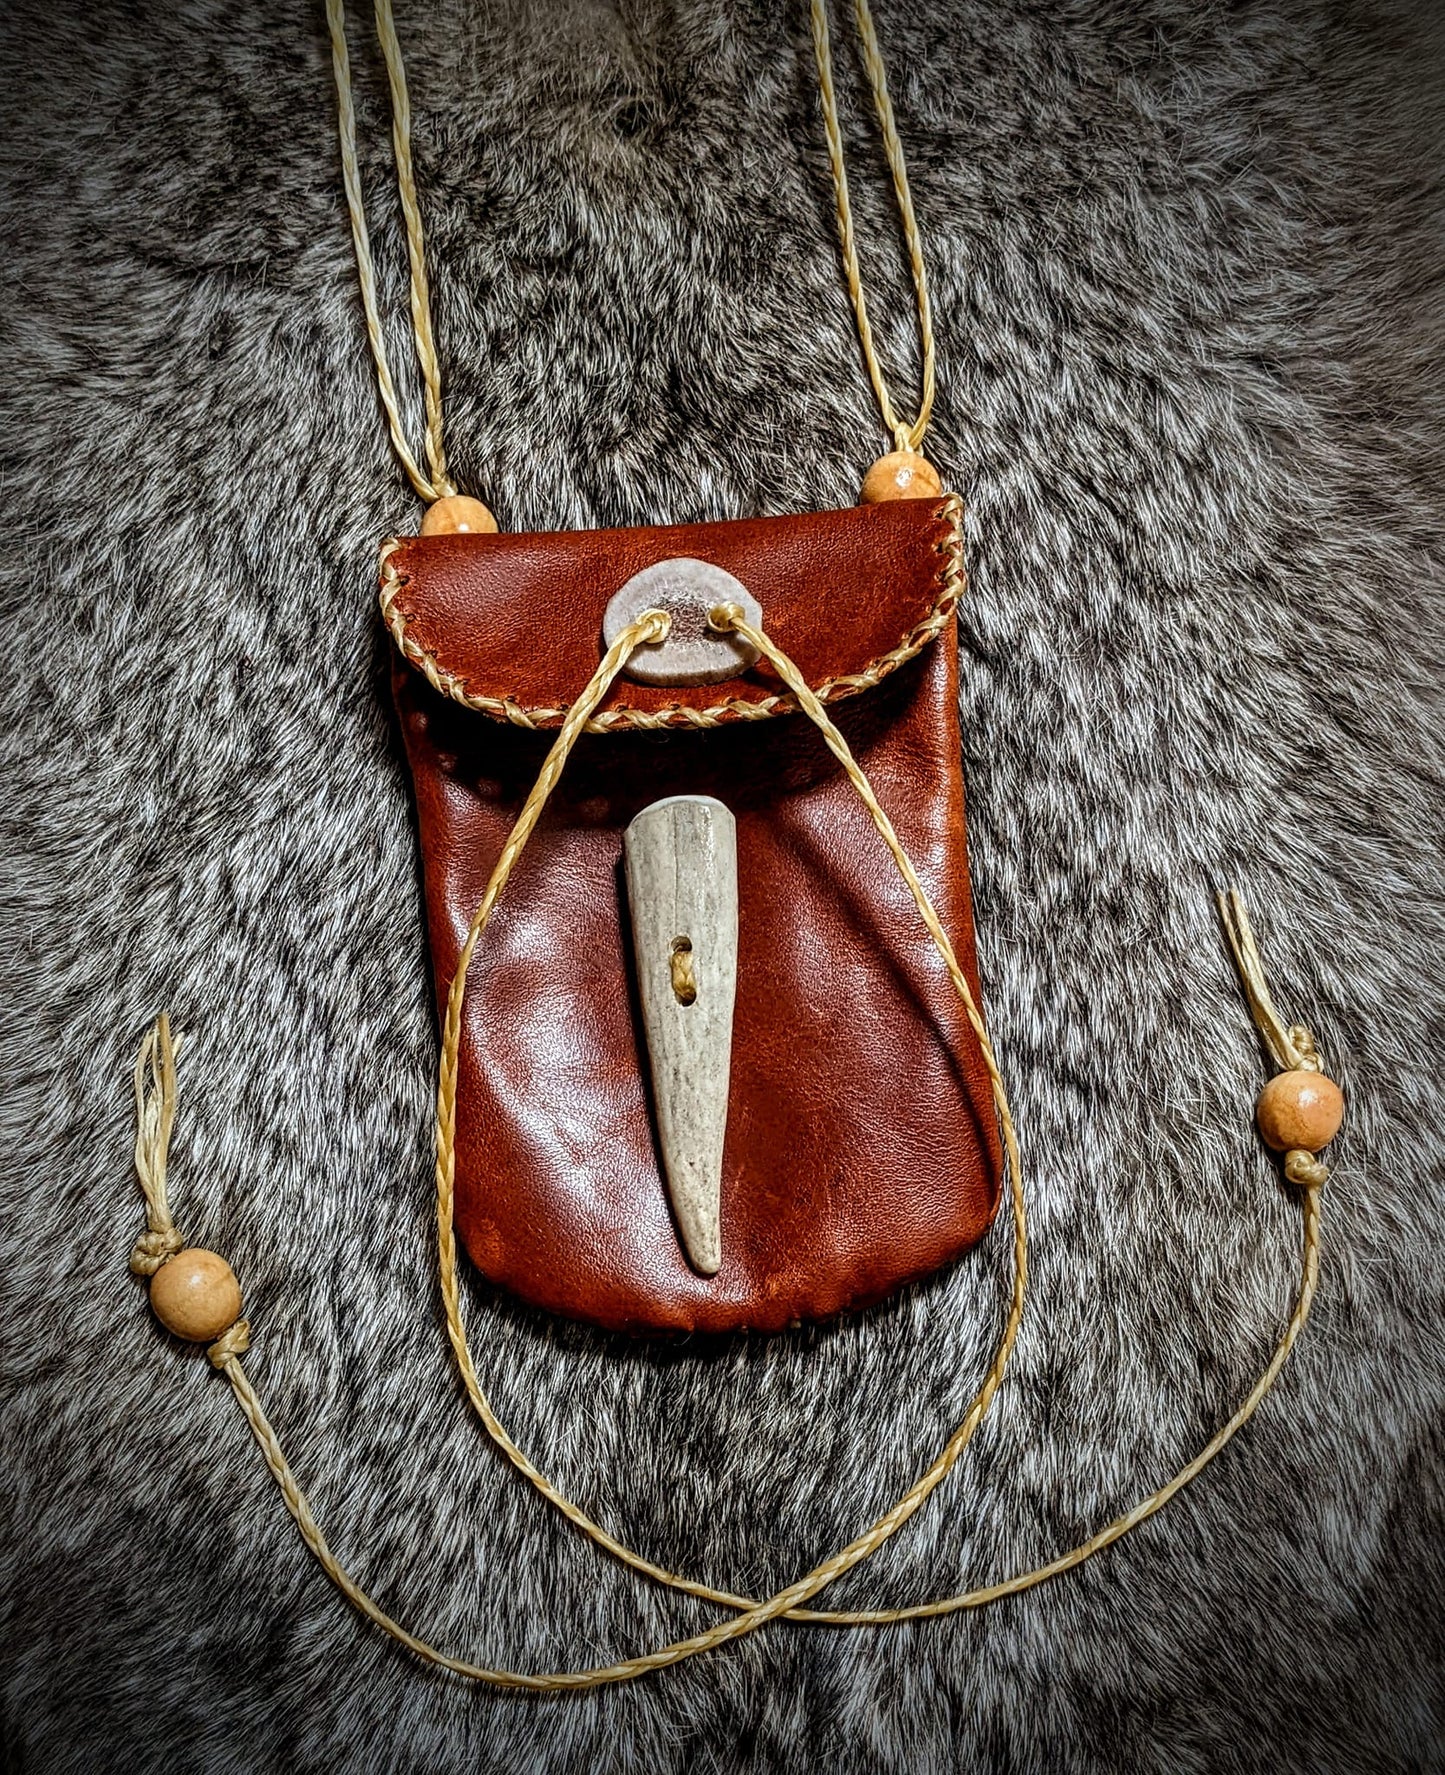 Wearable Hand Sewn Leather Rune or Medicine Bag | Antler Button